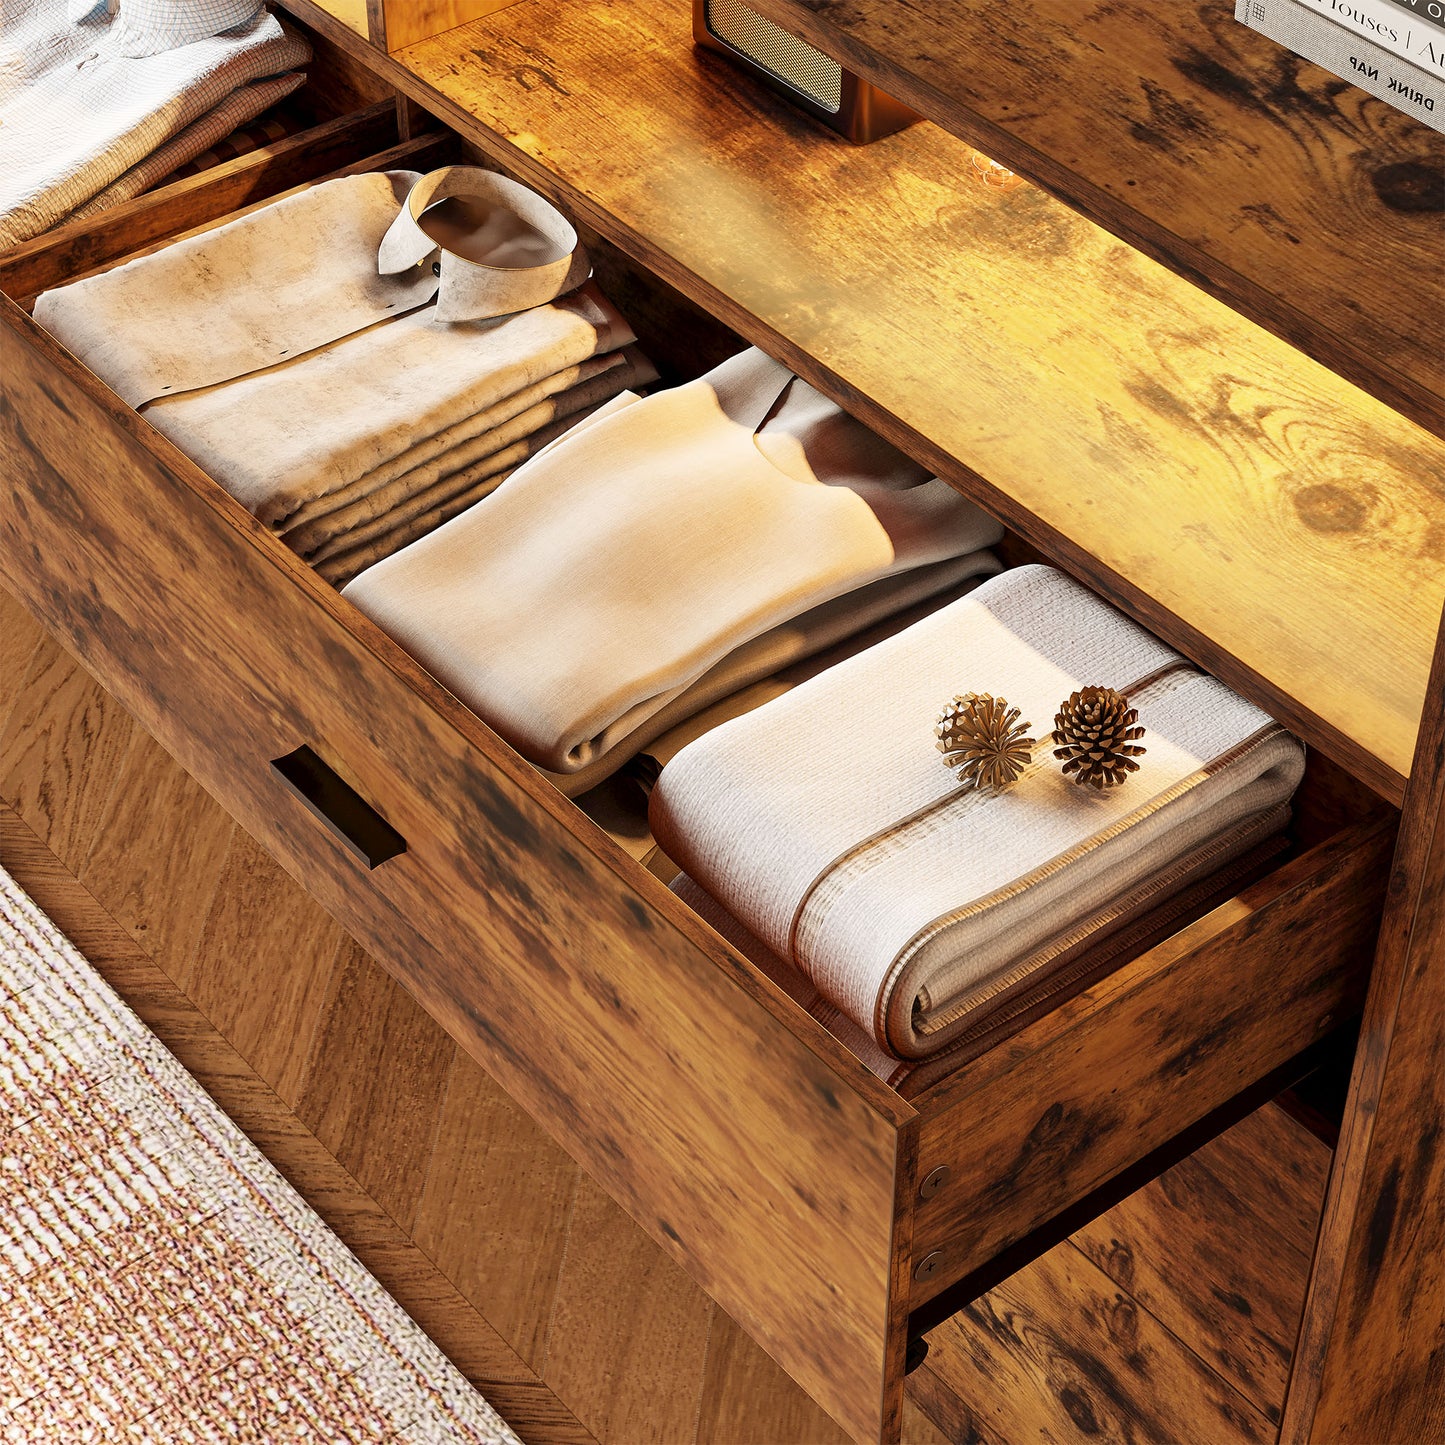 LIKIMIO Dressers & Chests of Drawers with Storage